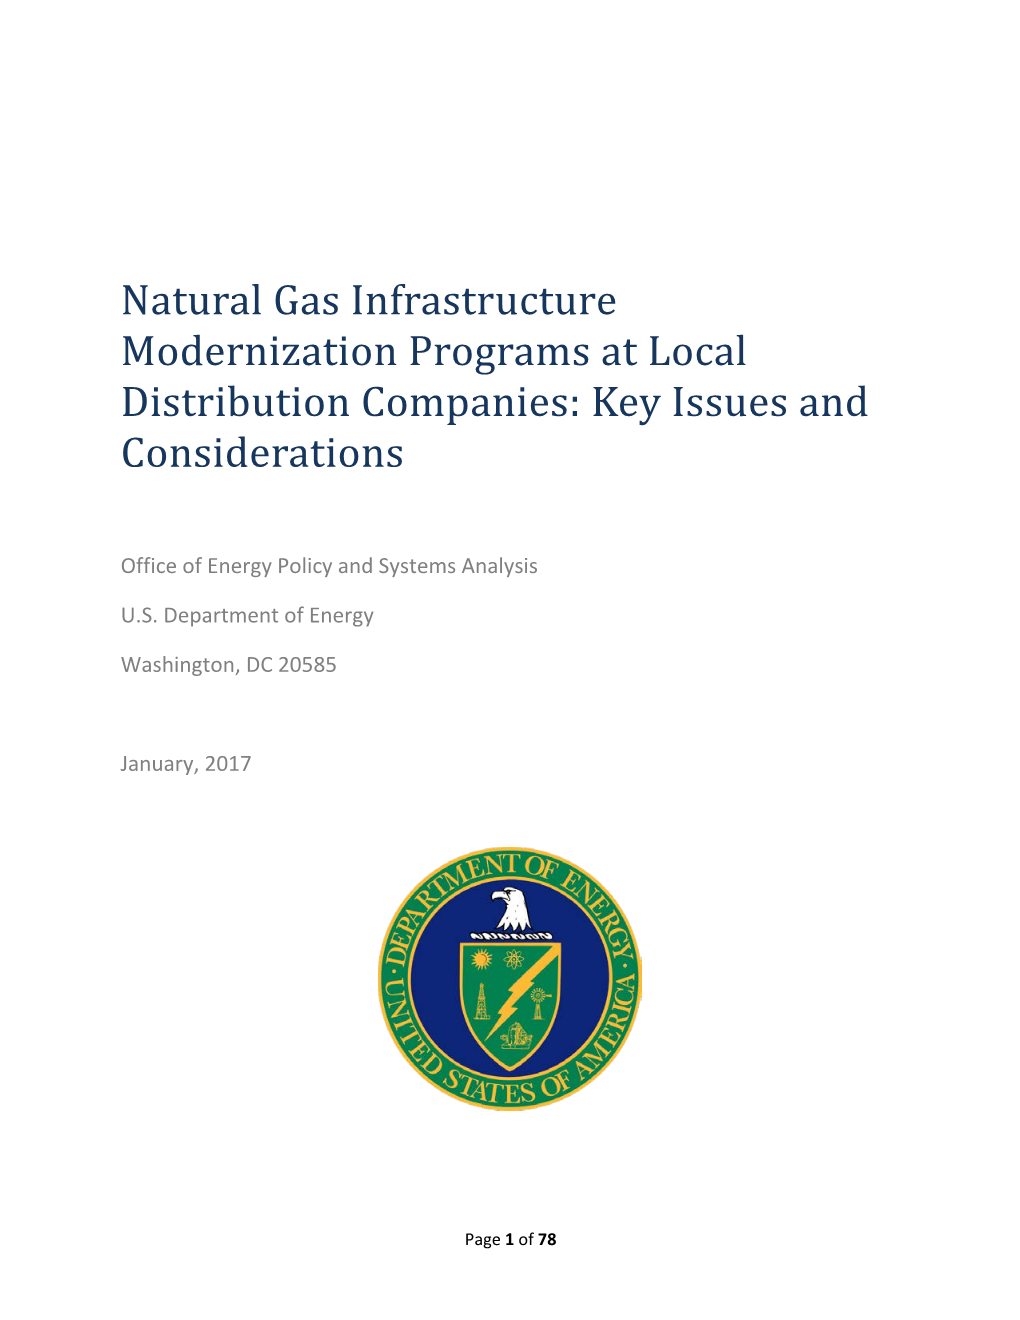 Natural Gas Infrastructure Modernization Programs at Local Distribution Companies: Key Issues and Considerations